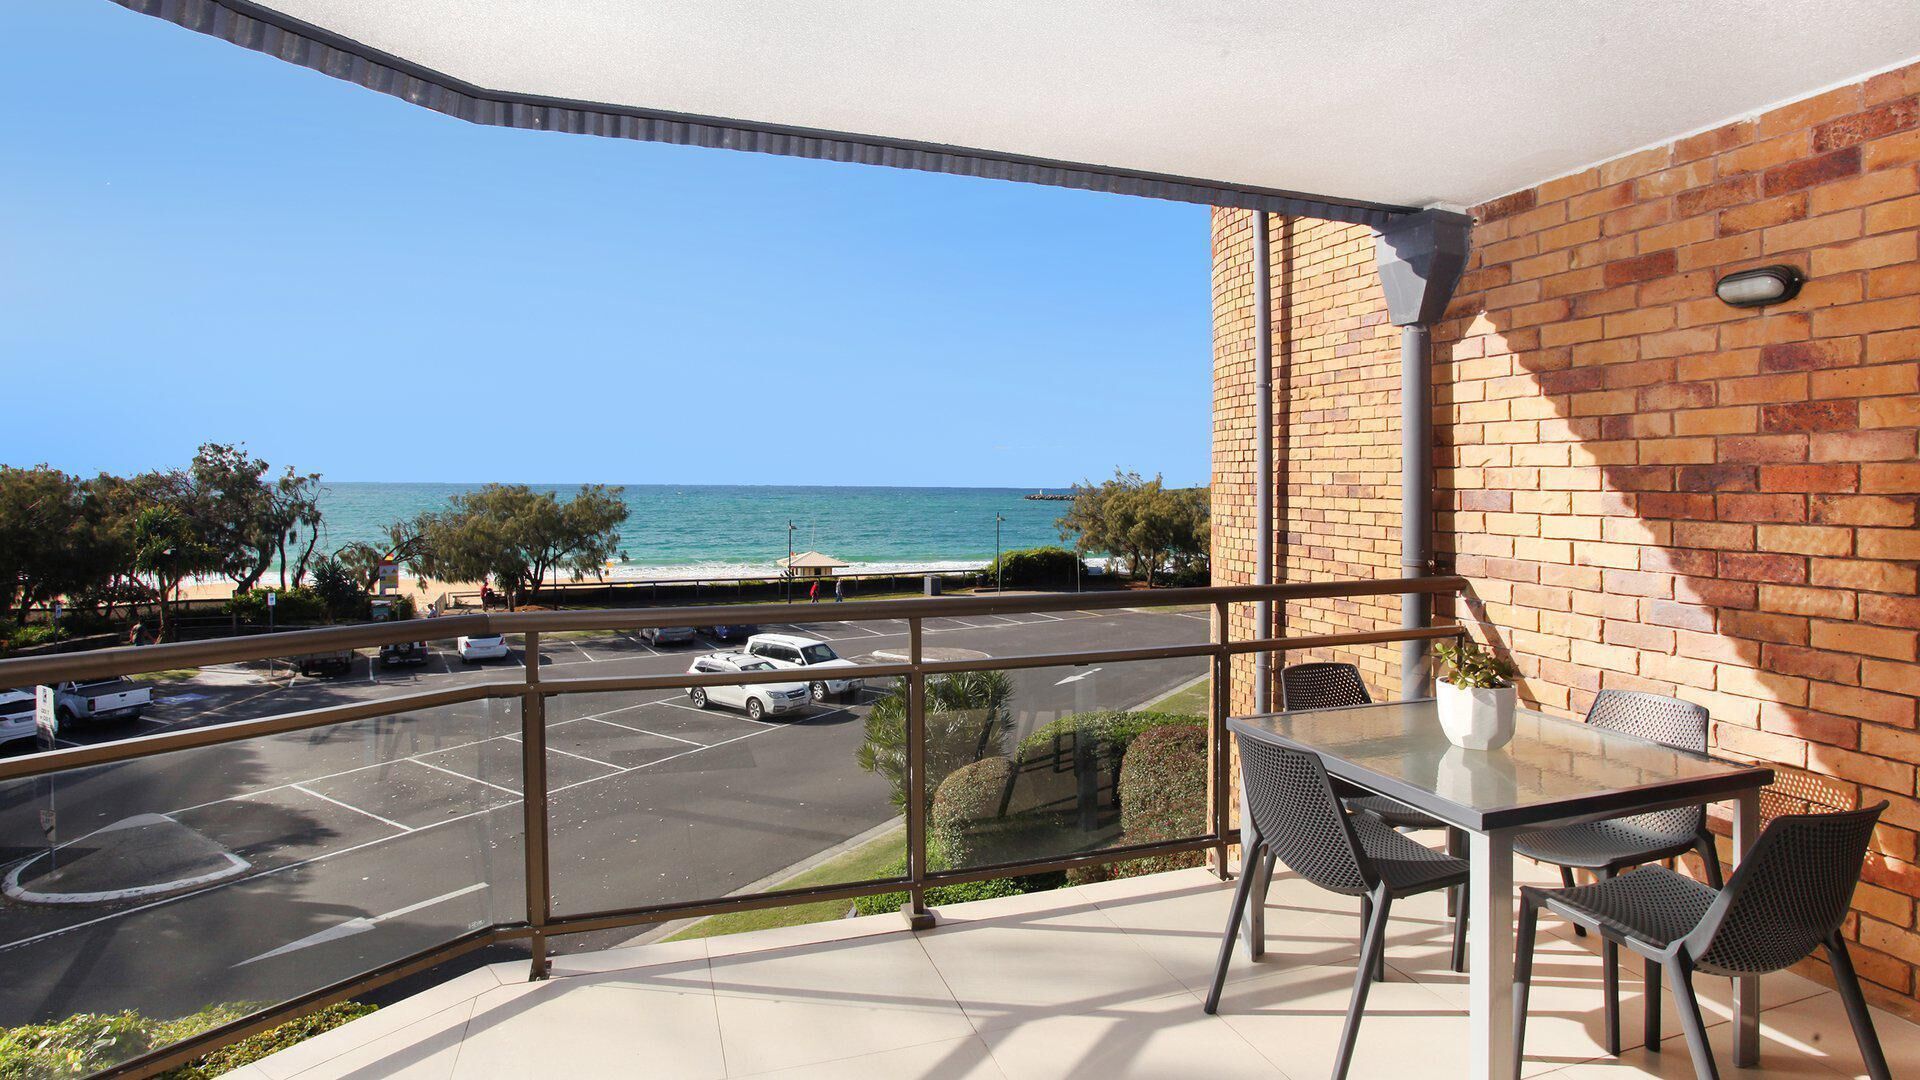 Jedda Unit 5 - 3 Bedroom with Private Rooftop Spa+Bbq and FREE WIFI!